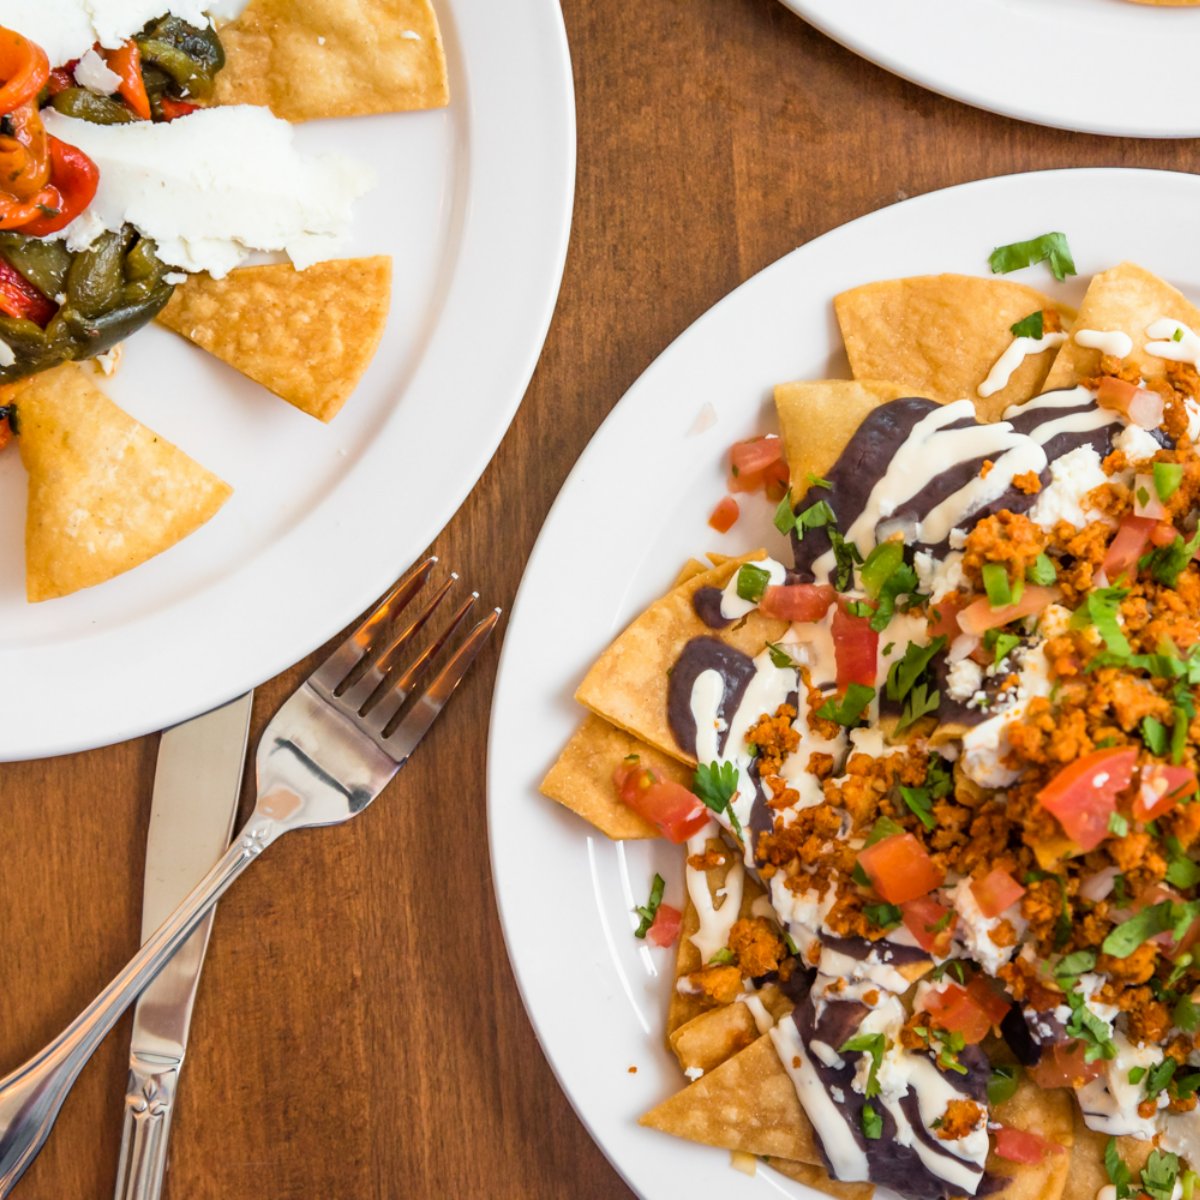 Fun fact: Did you know that all Mexican dishes are made from scratch? That means you can expect bold, delicious flavors with every bite of our south-of-the-border cuisine!